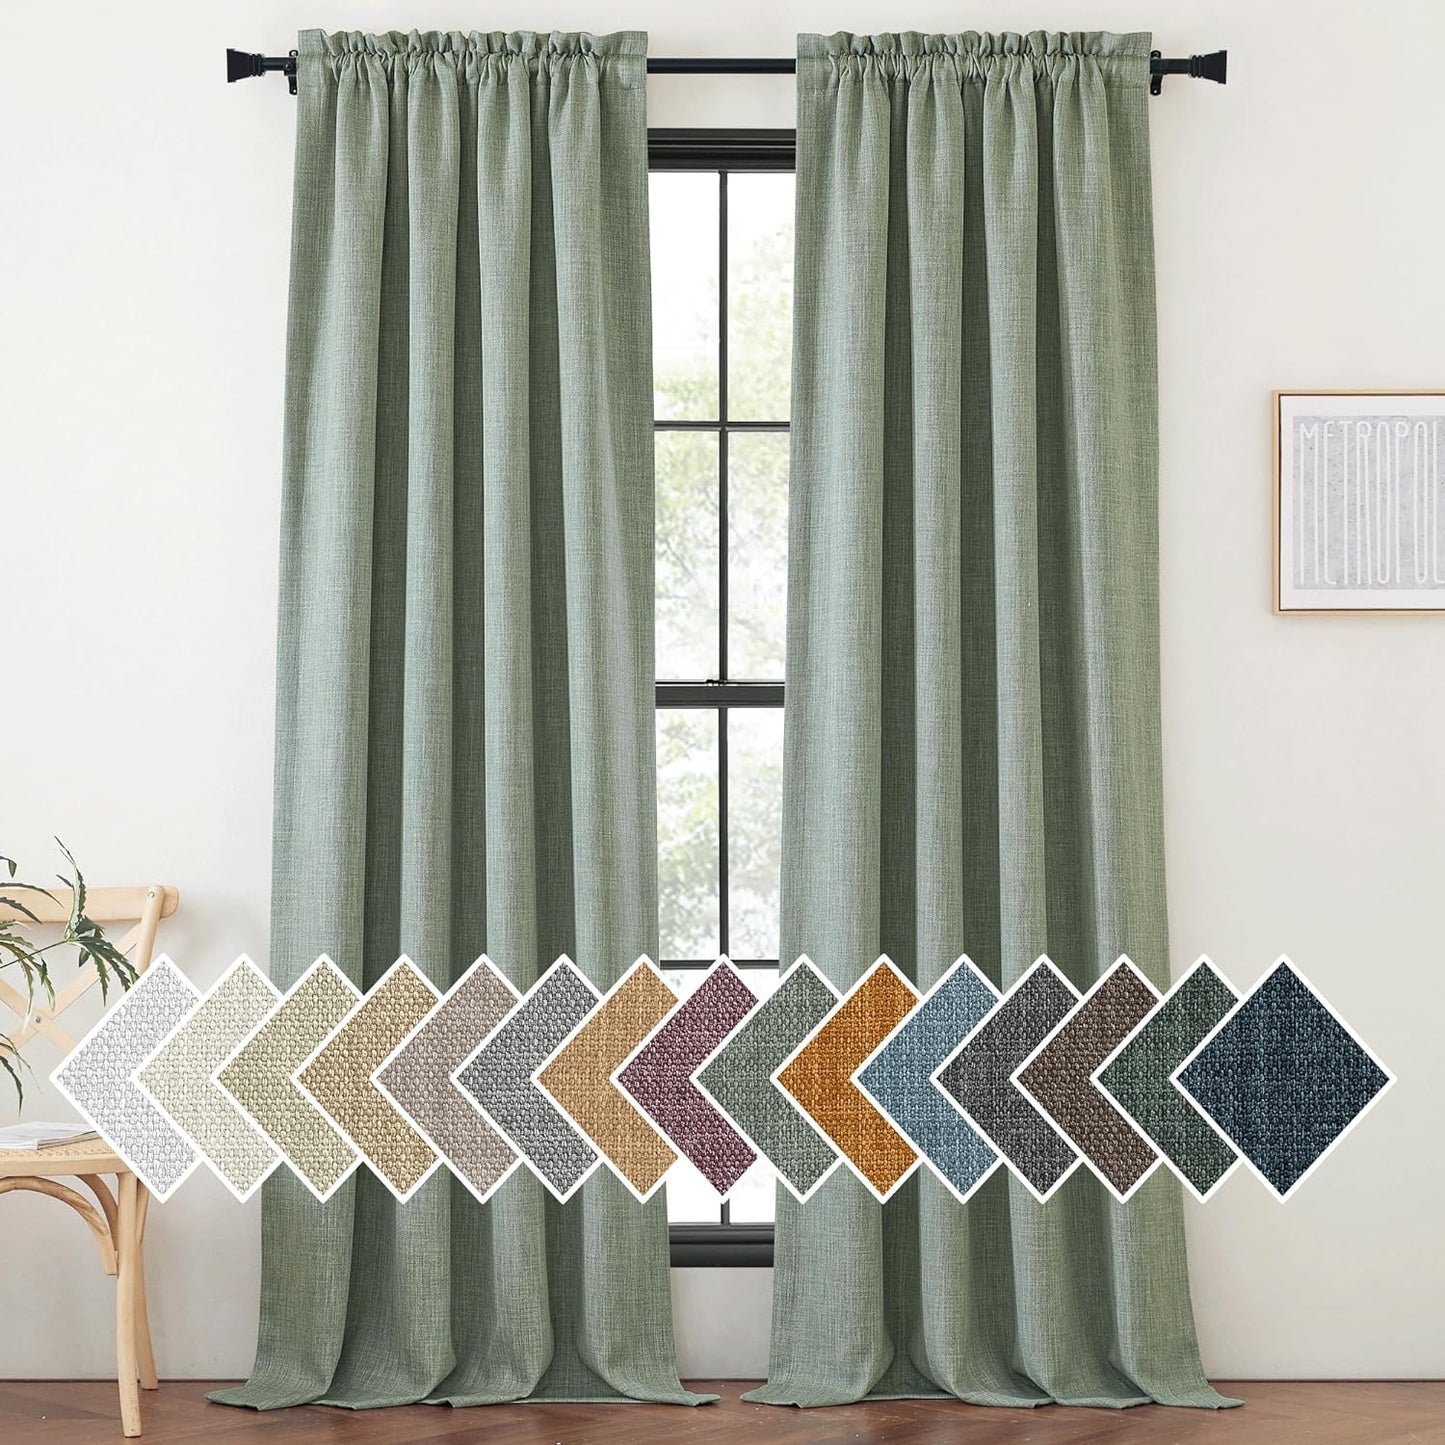 NICETOWN Faux Linen Room Darkening Curtains & Drapes for Living Room, Dual Rod Pockets & Hook Belt Heat/Light Blocking Window Treatments Thermal Drapes for Bedroom, Angora, W52 X L84, 2 Panels  NICETOWN Sage Green W52 X L84 